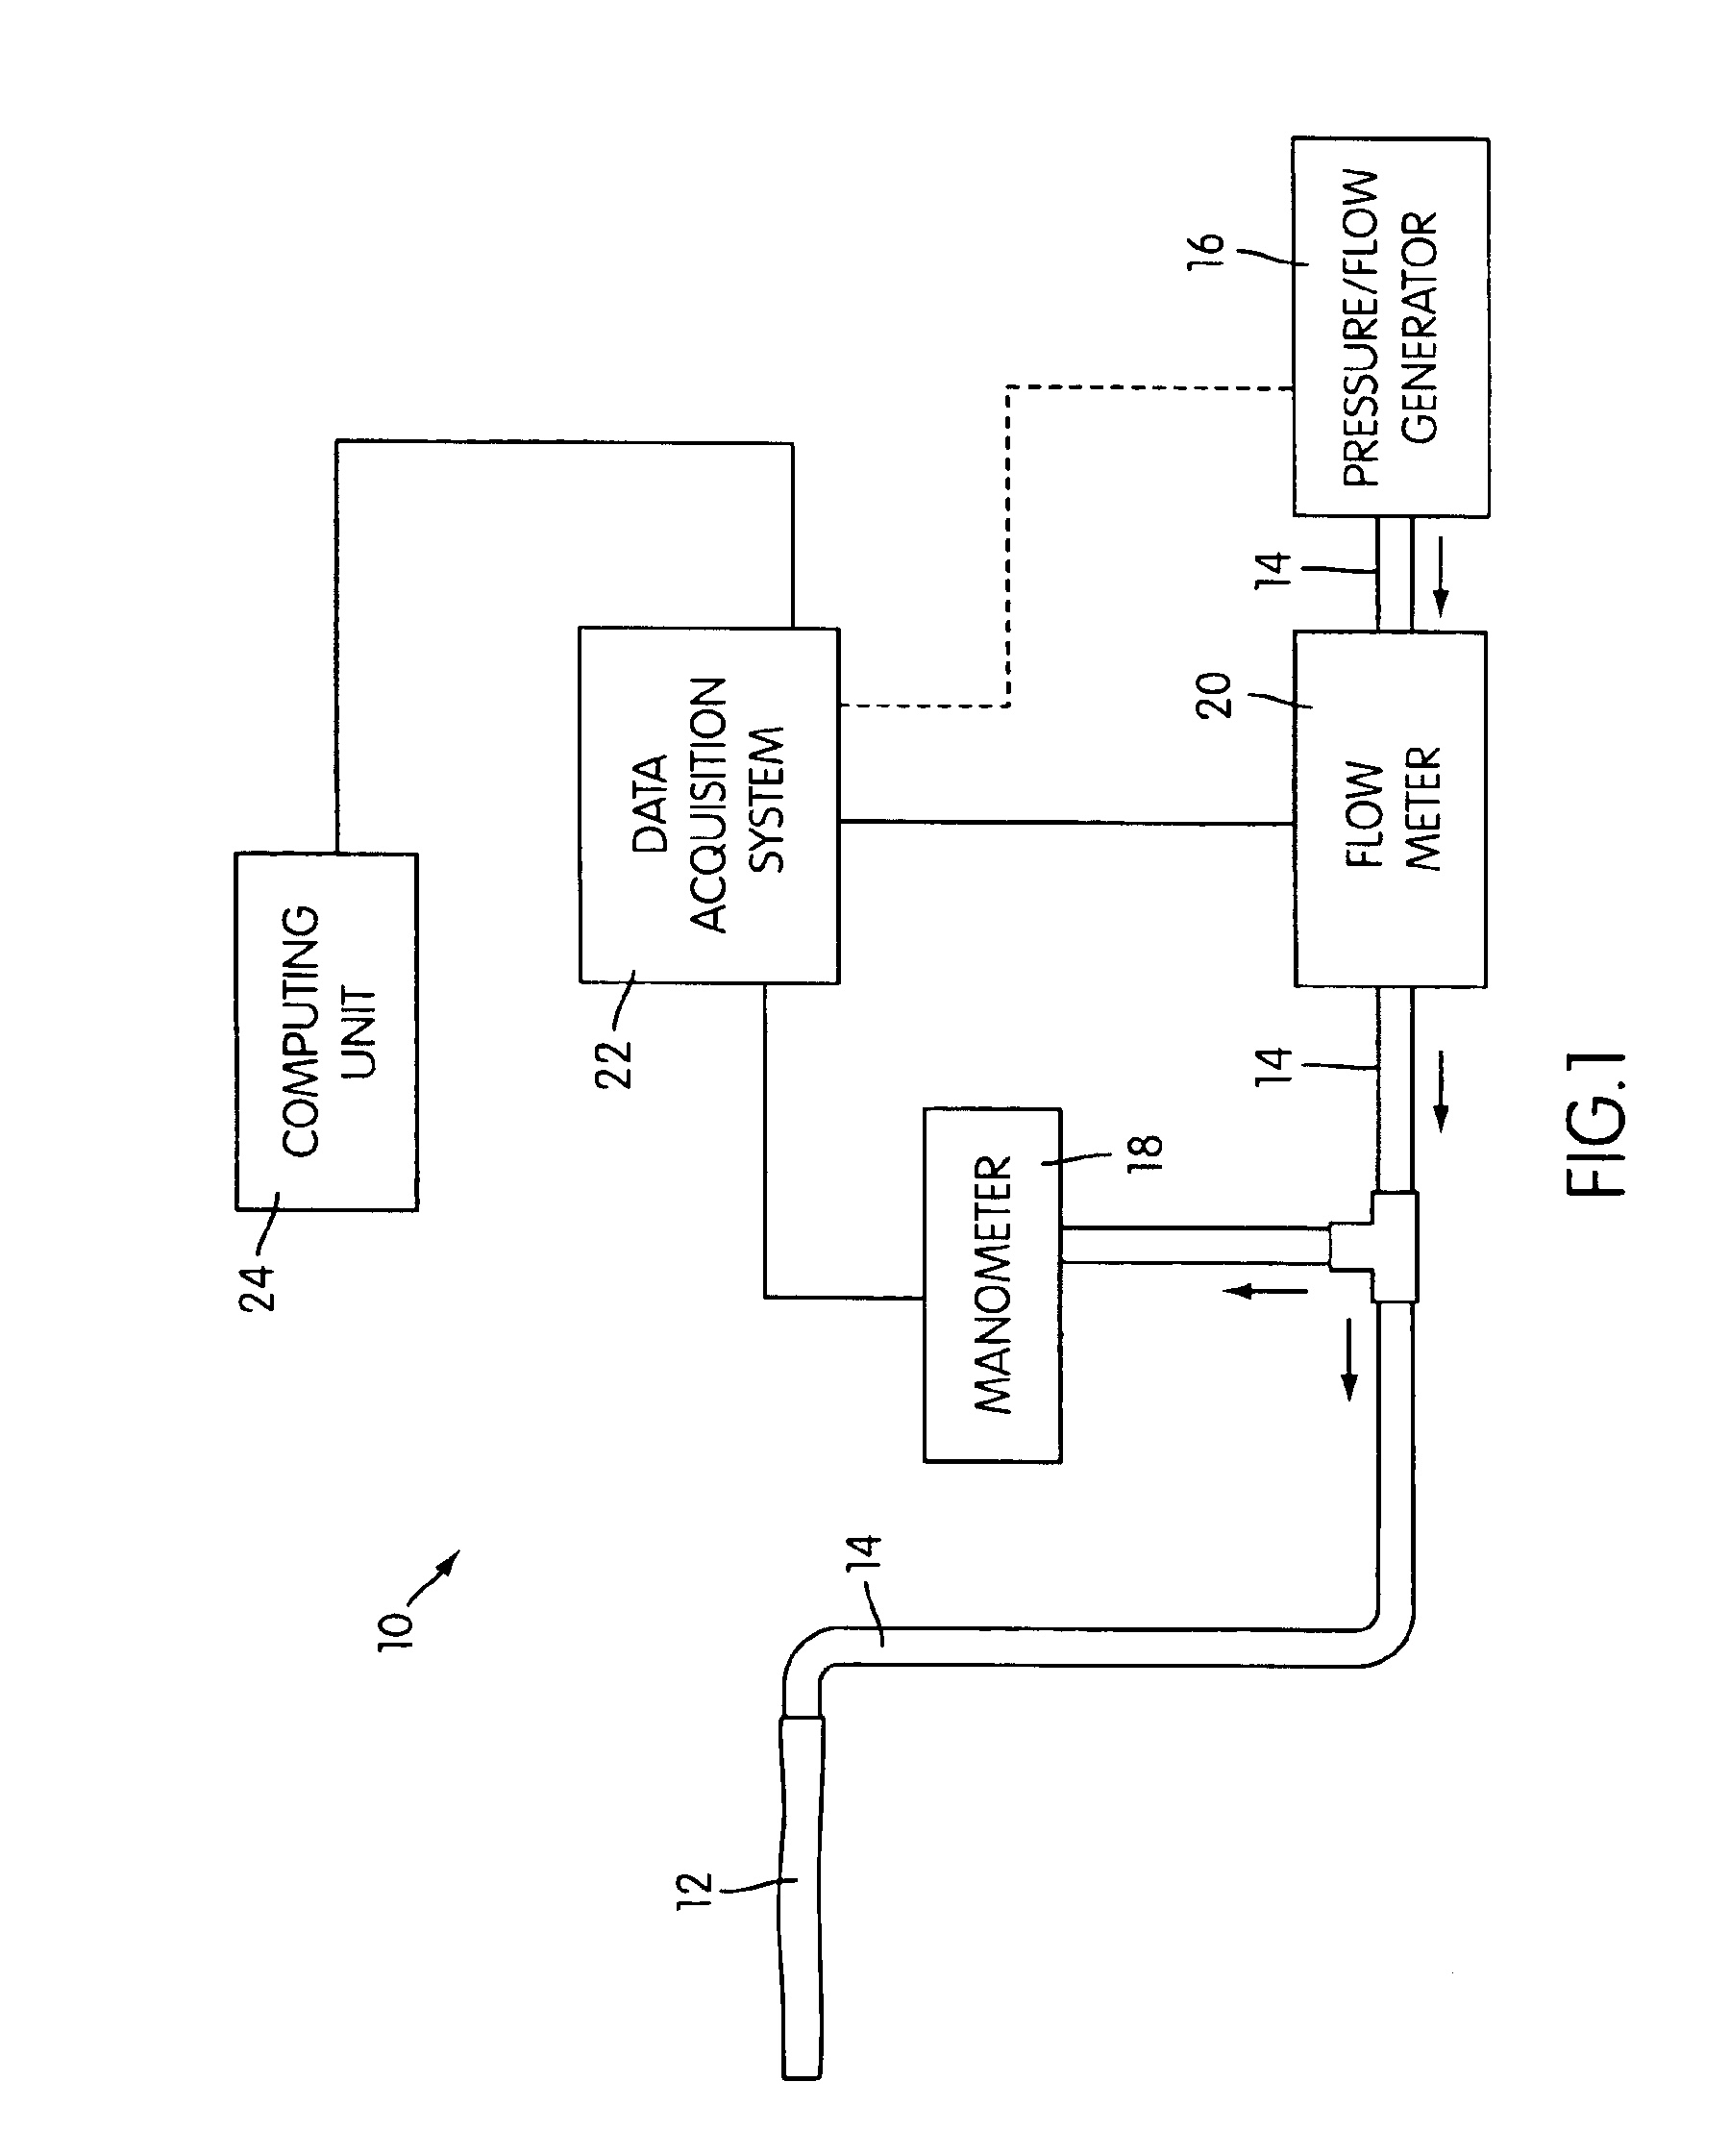 Method and apparatus for measurement of pressure at a device/body interface